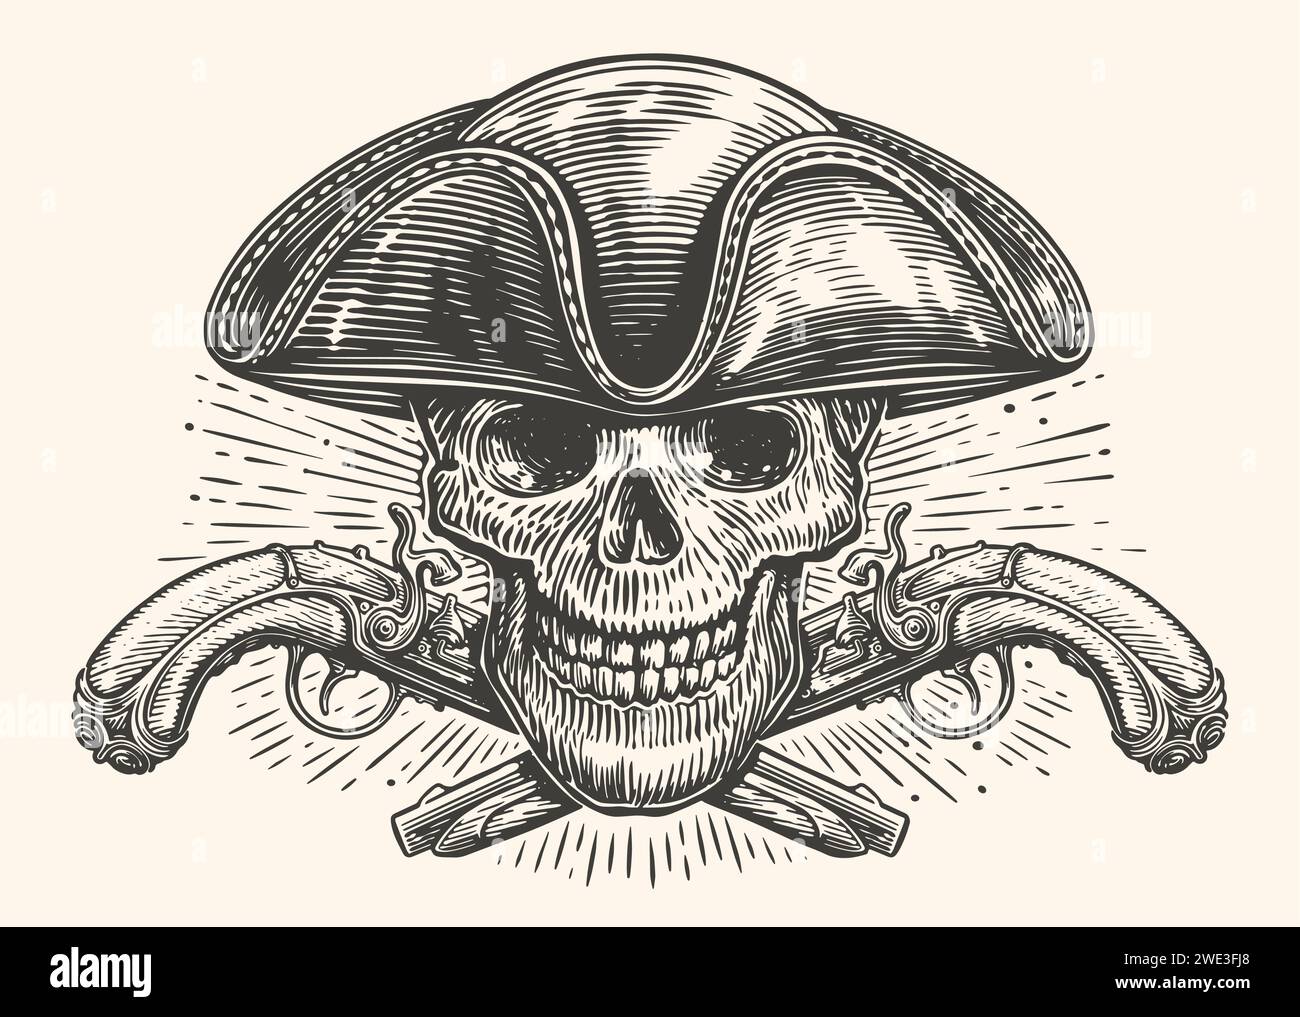 Pirate skeleton and vintage pistols. Skull head in cocked hat. Vector illustration engraving style Stock Vector